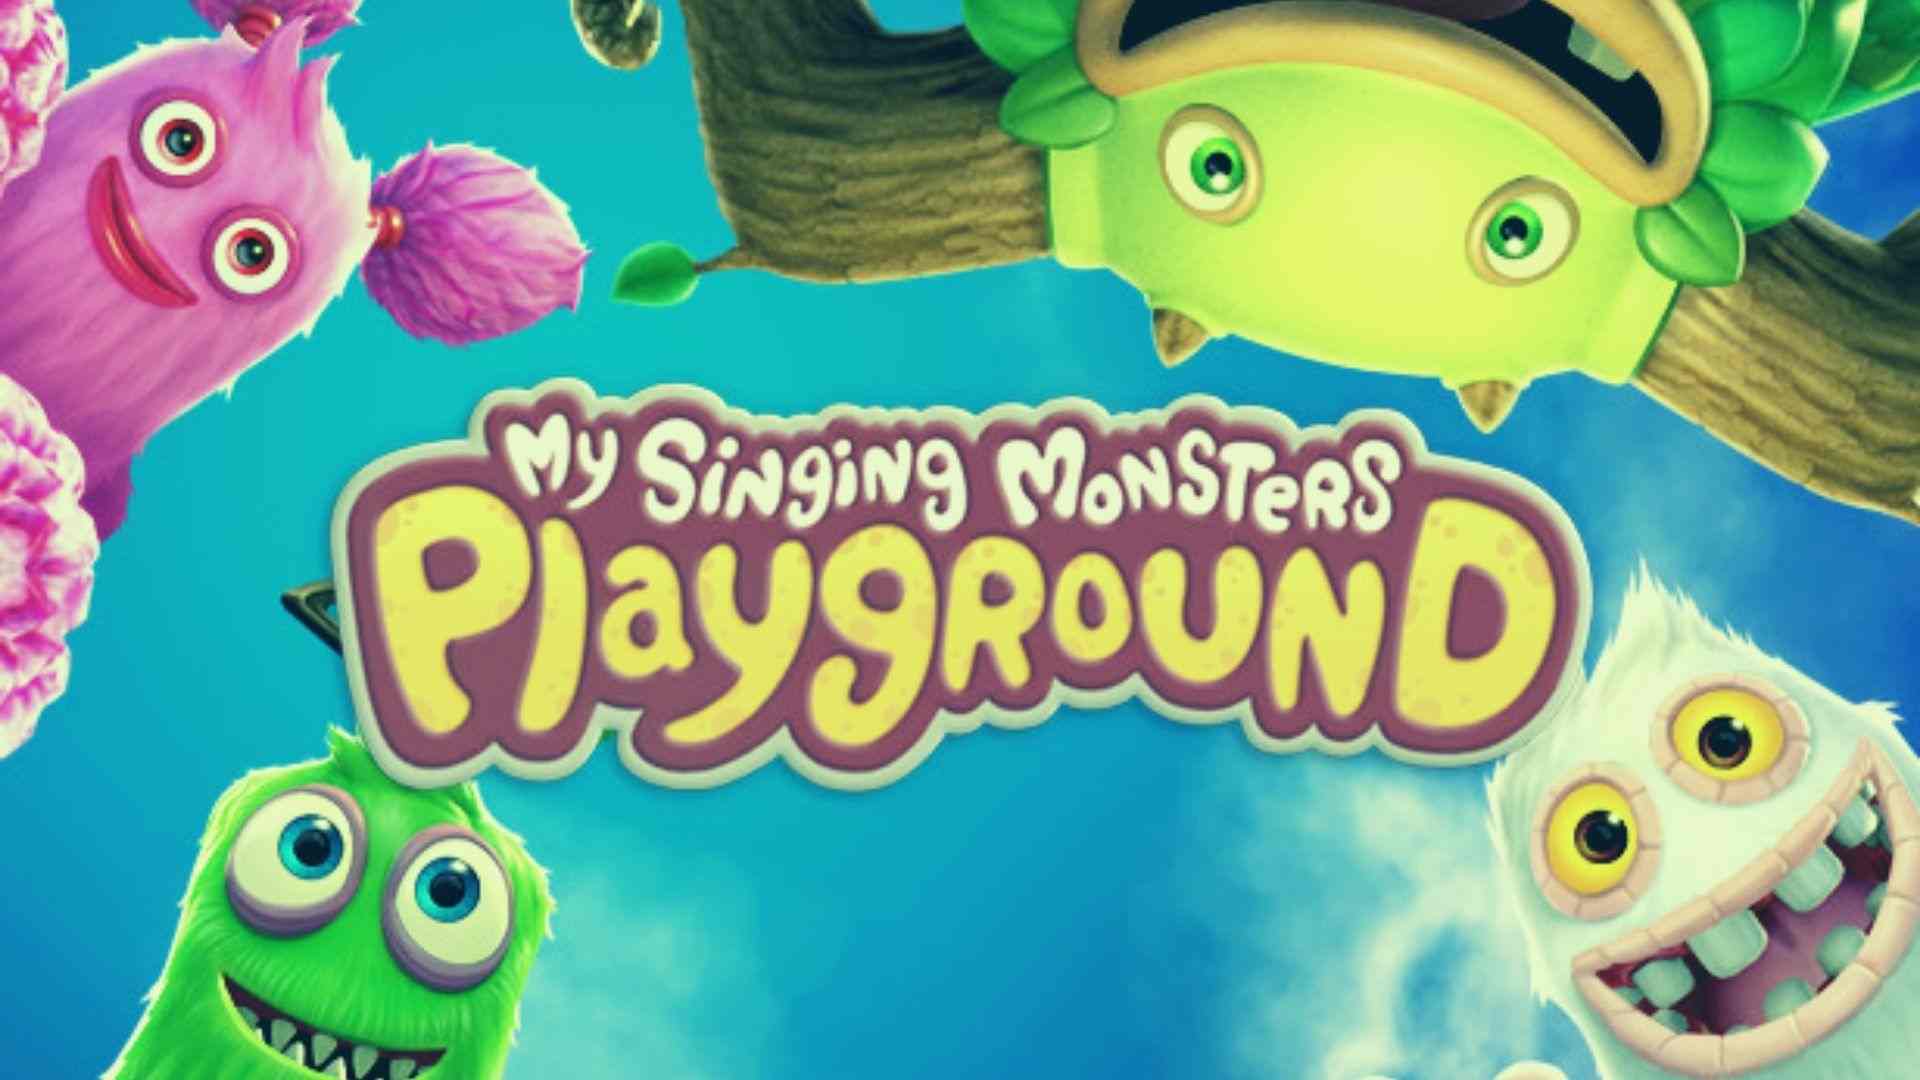 My Singing Monsters Playground Age Rating and Parents Guide 2021